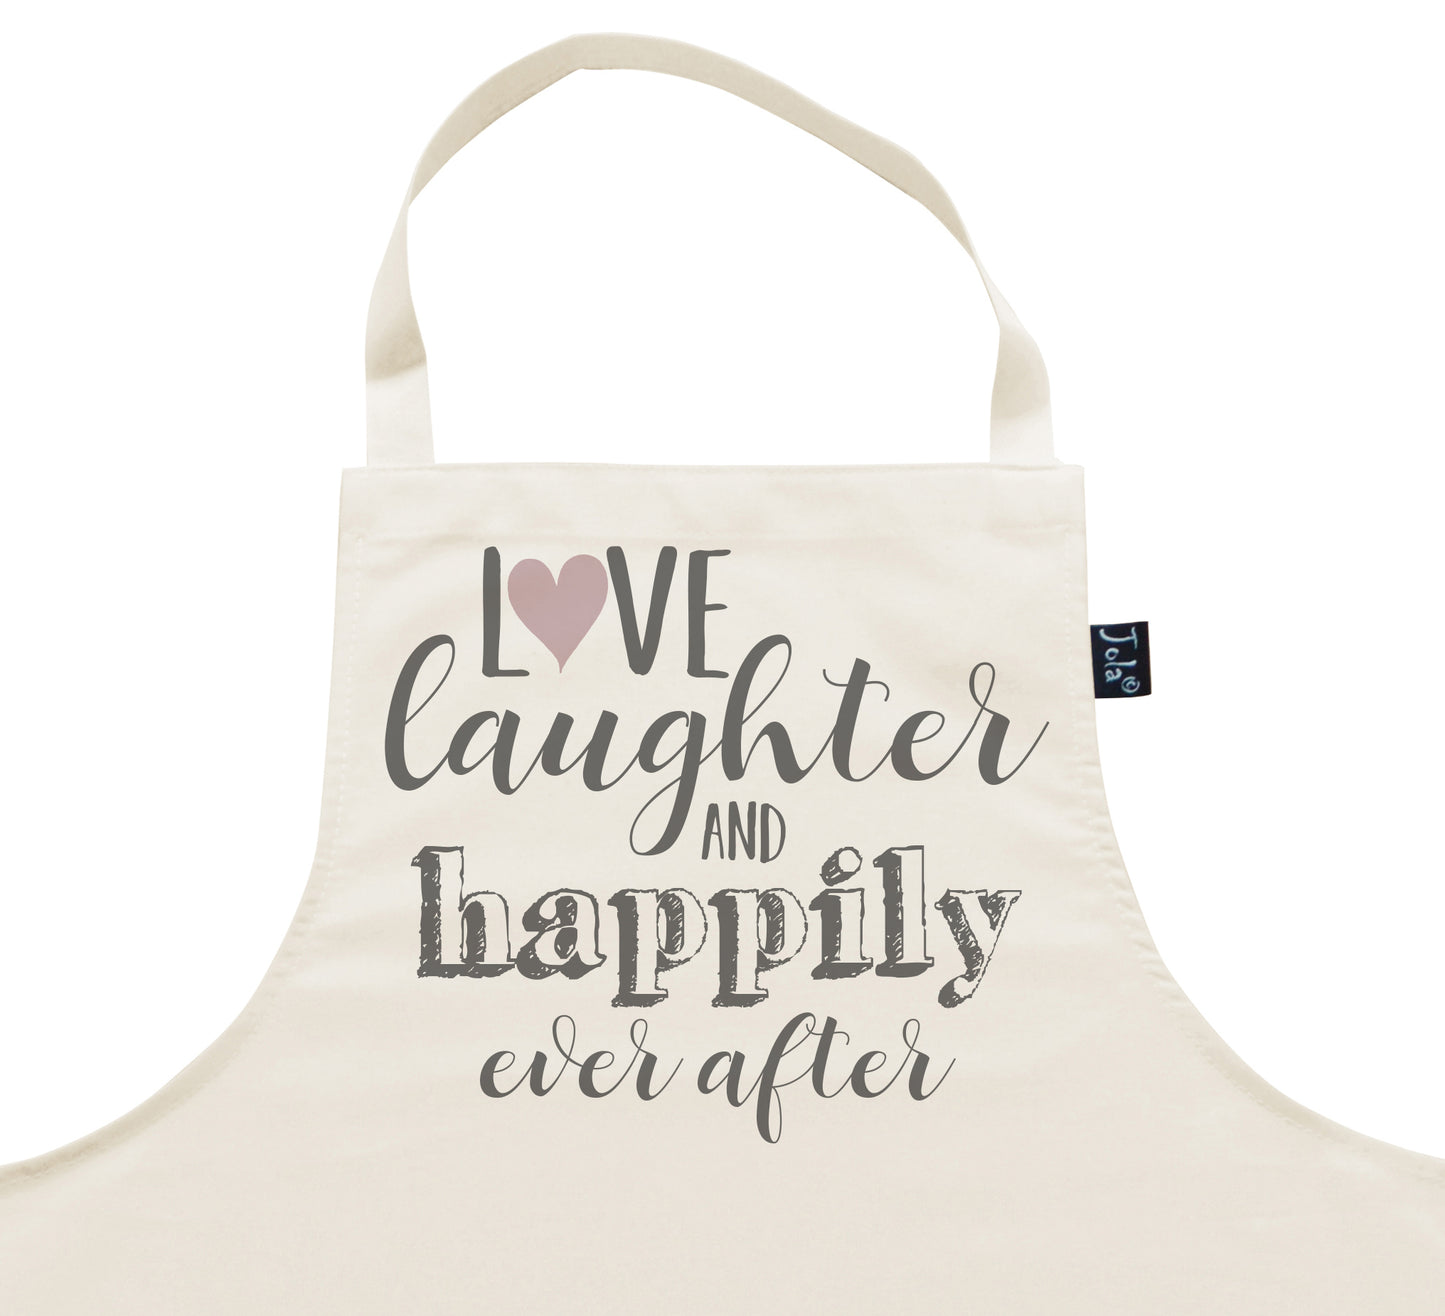 Love Laughter and Happily ever after Apron